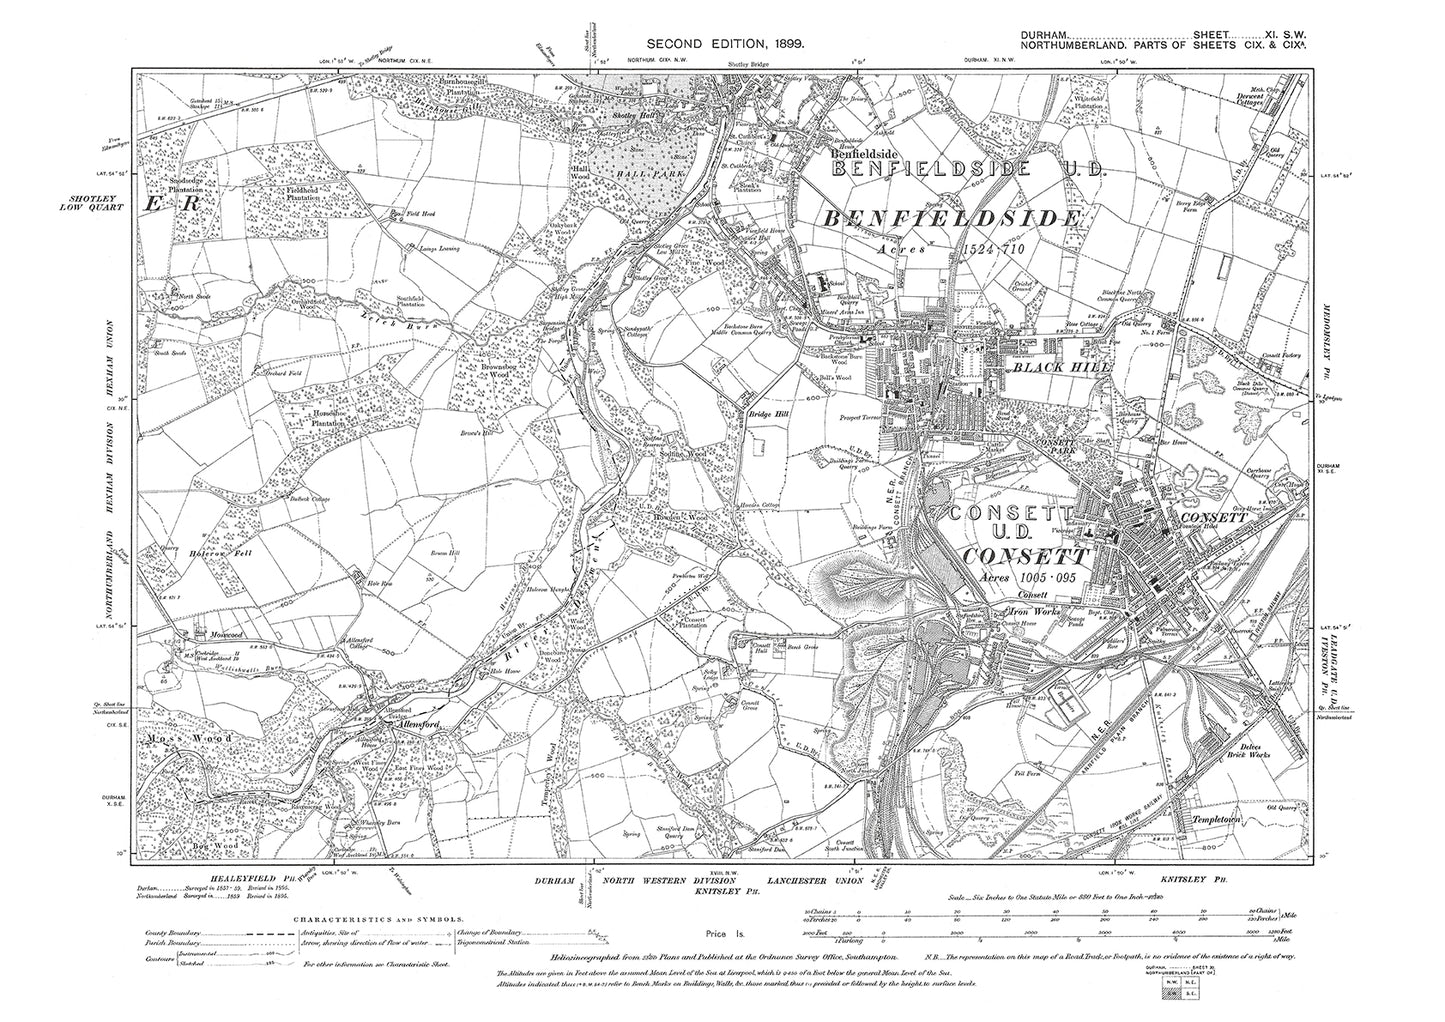 Old OS map dated 1899, showing Consett, Black Hill and Benfieldside in Durham - 11SW